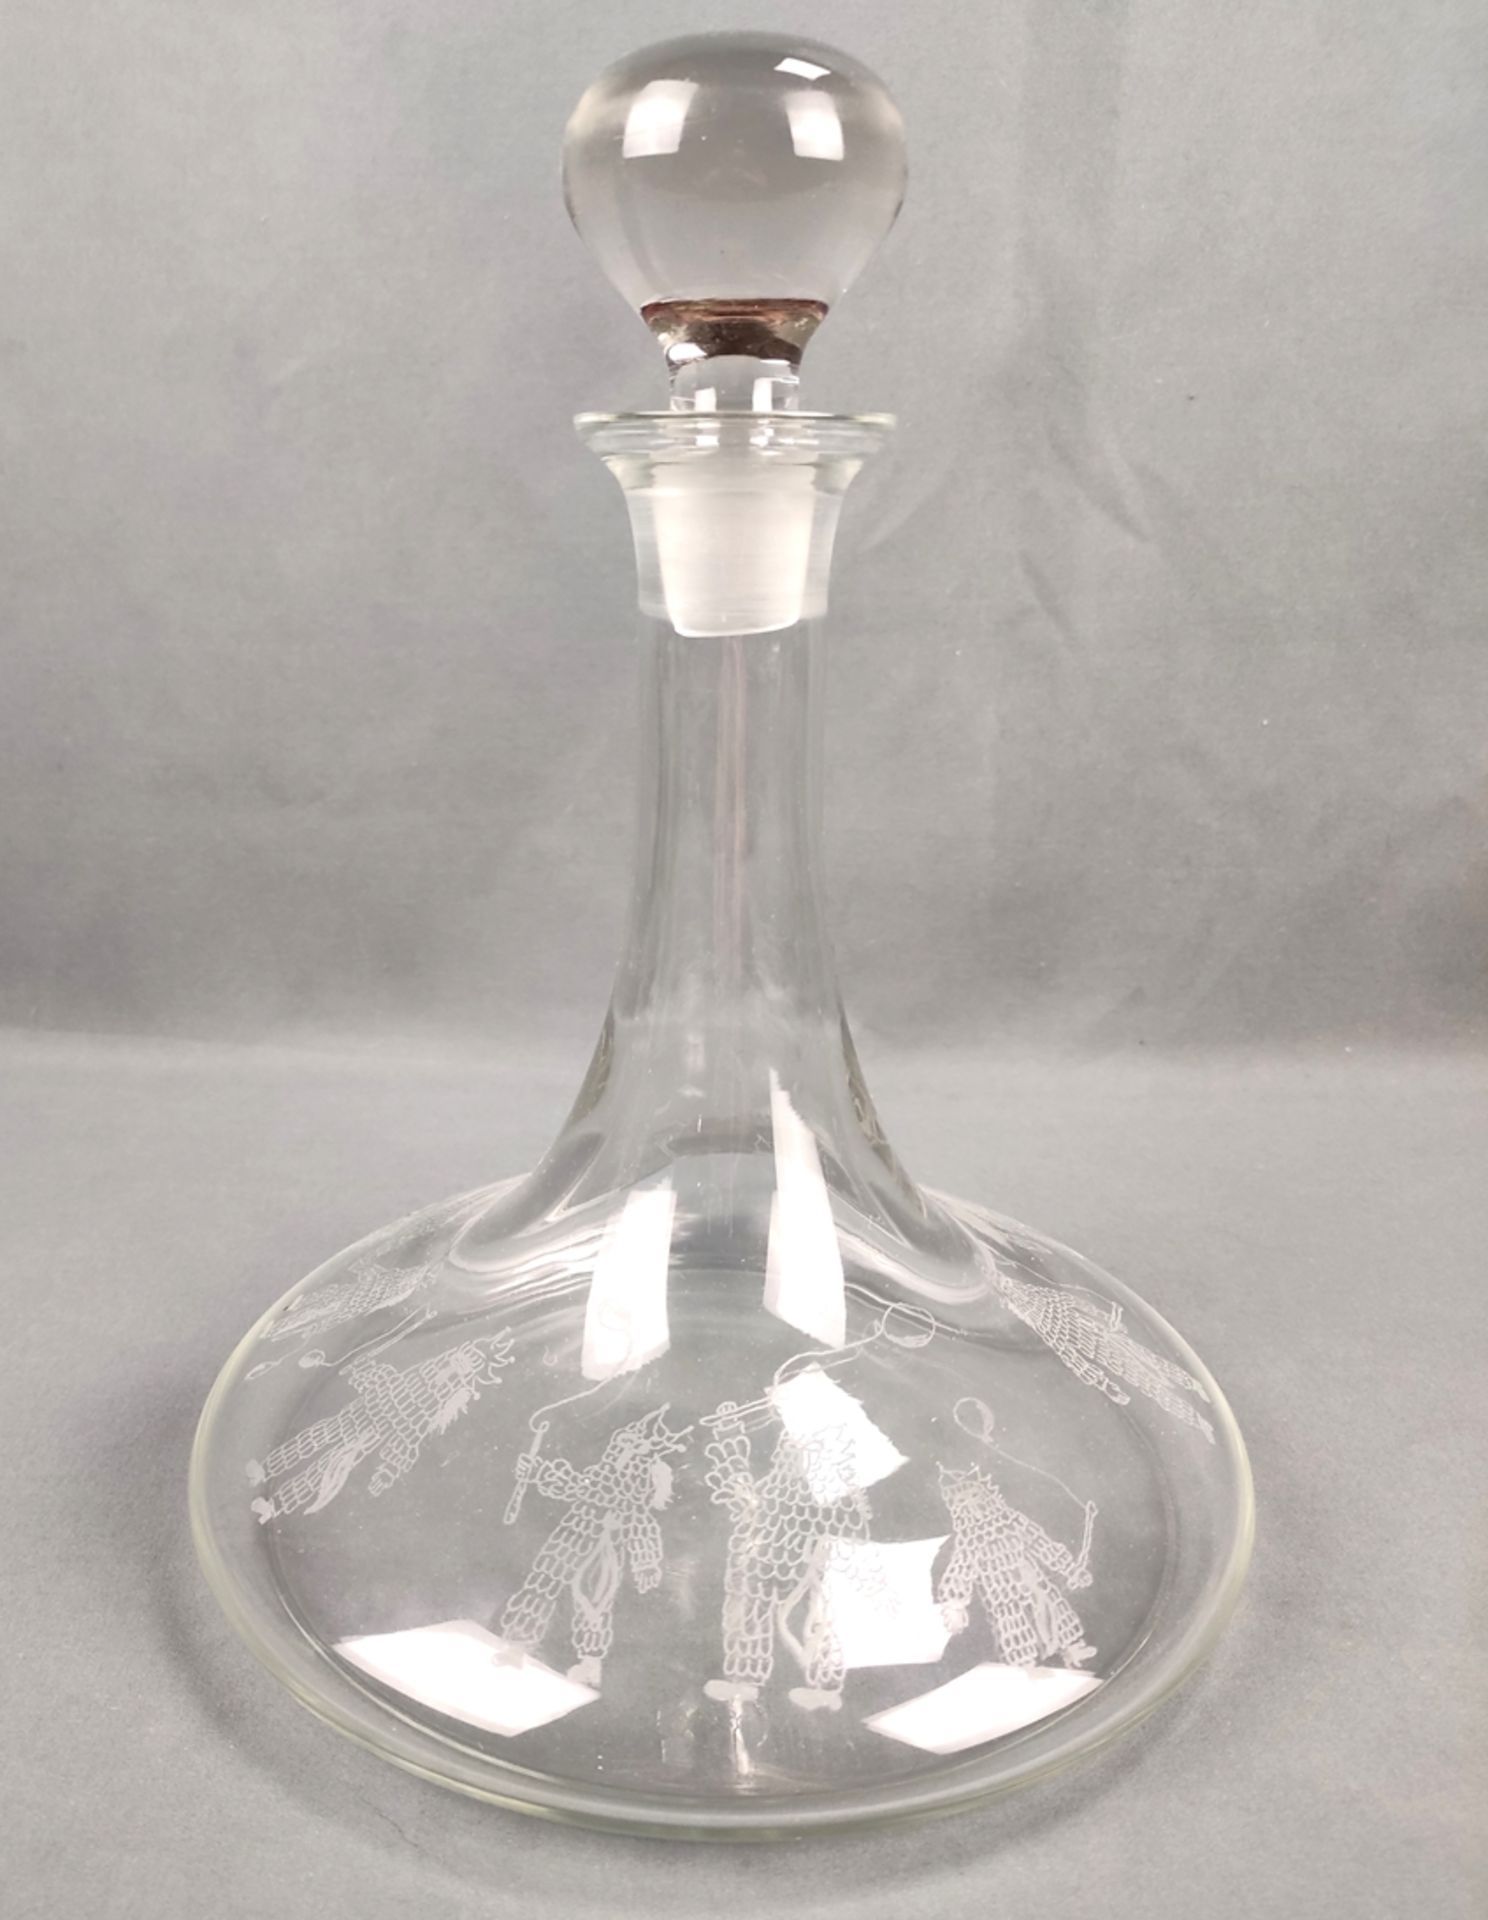 Wine decanter with stopper, colorless glass, circumferential "Blätzlebueben" decor, height with sto